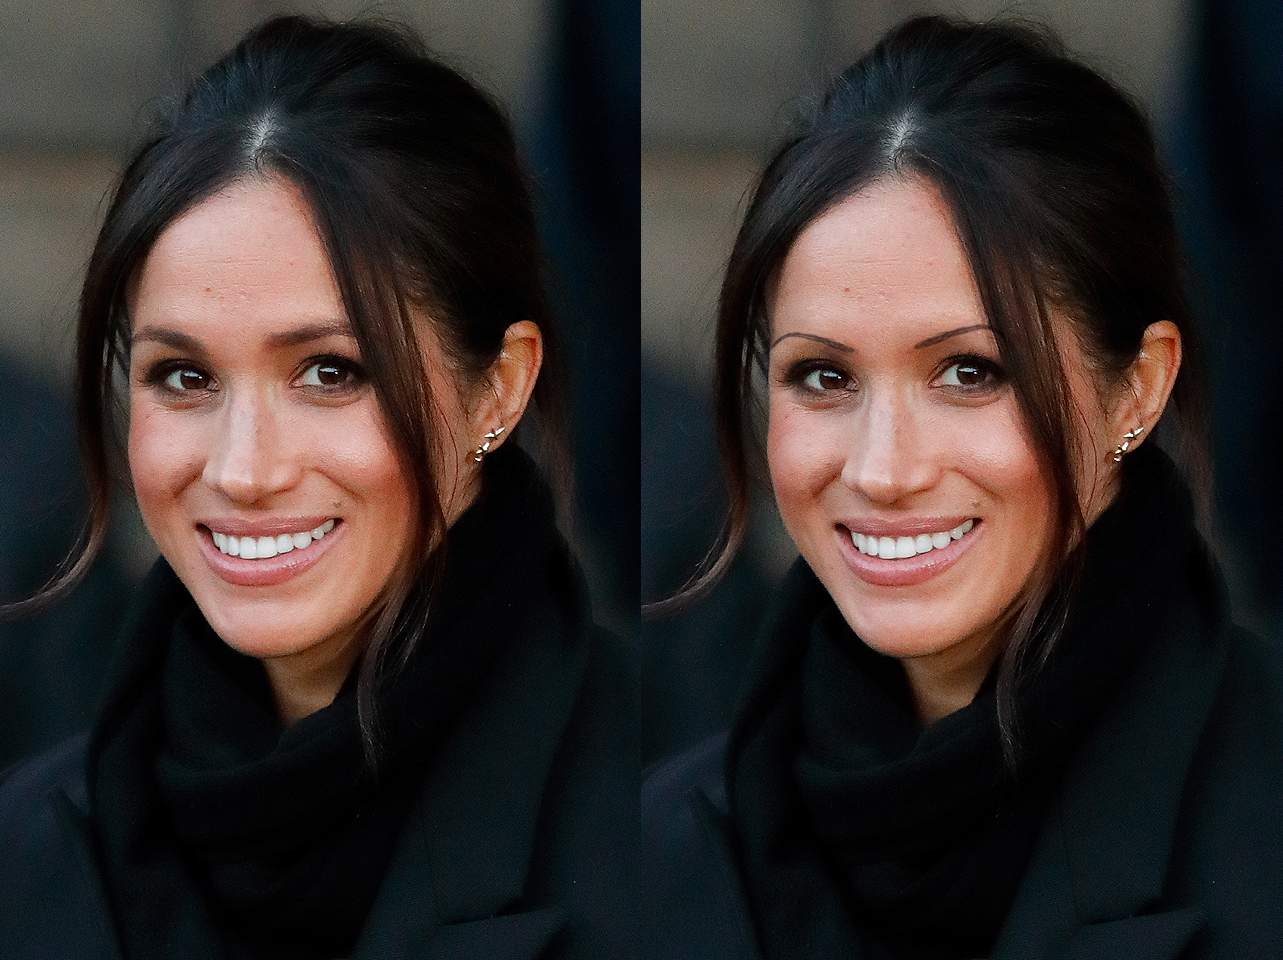 Meghan Markle's signature brows from 2018 vs a digitally edited thin-brow look | Source: Getty Images